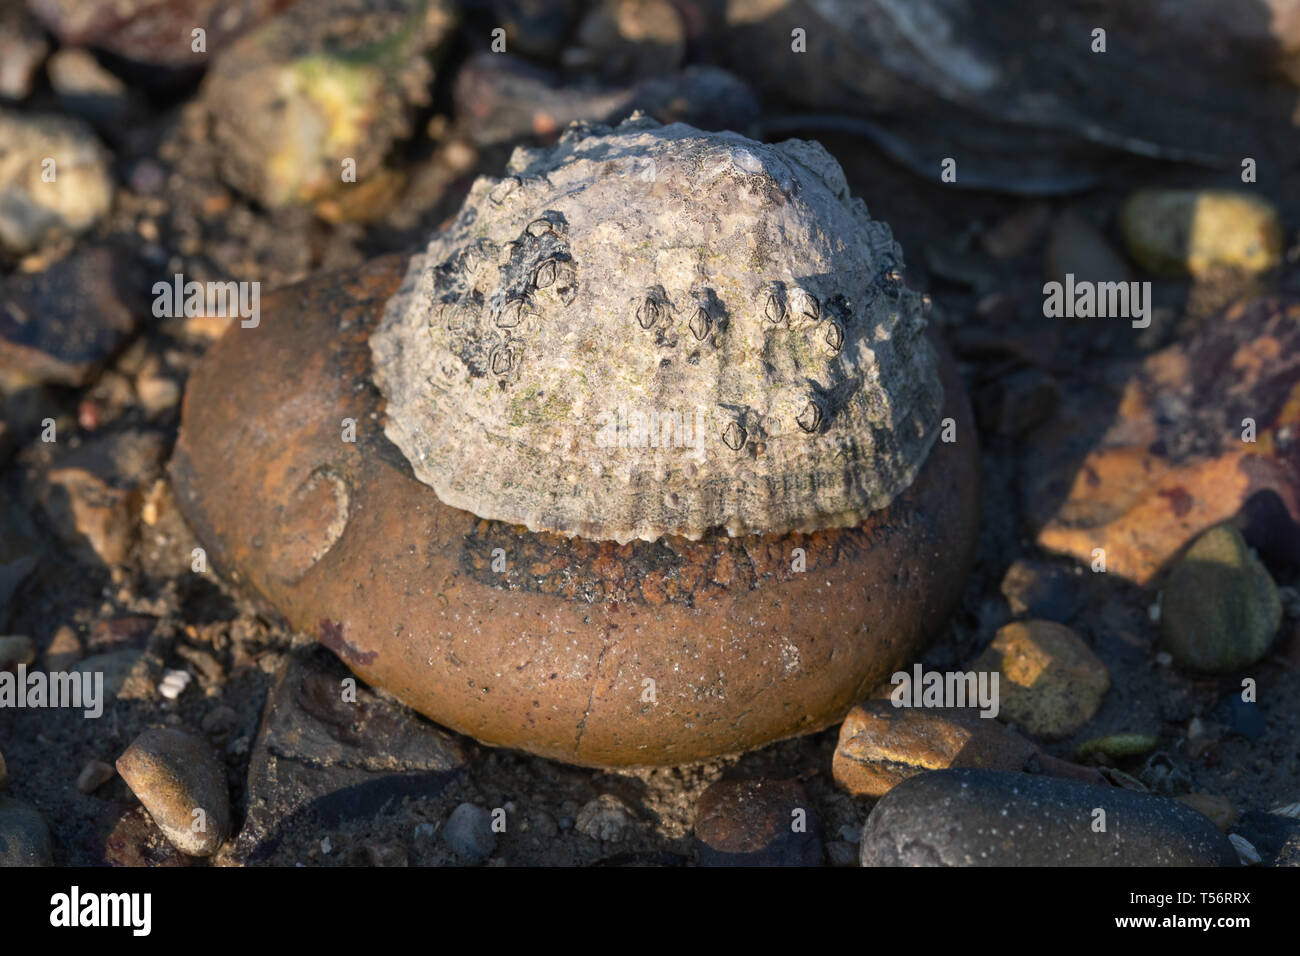 Common limpet (Patella vulgata) attached to a pebble on the beach, UK Stock Photo